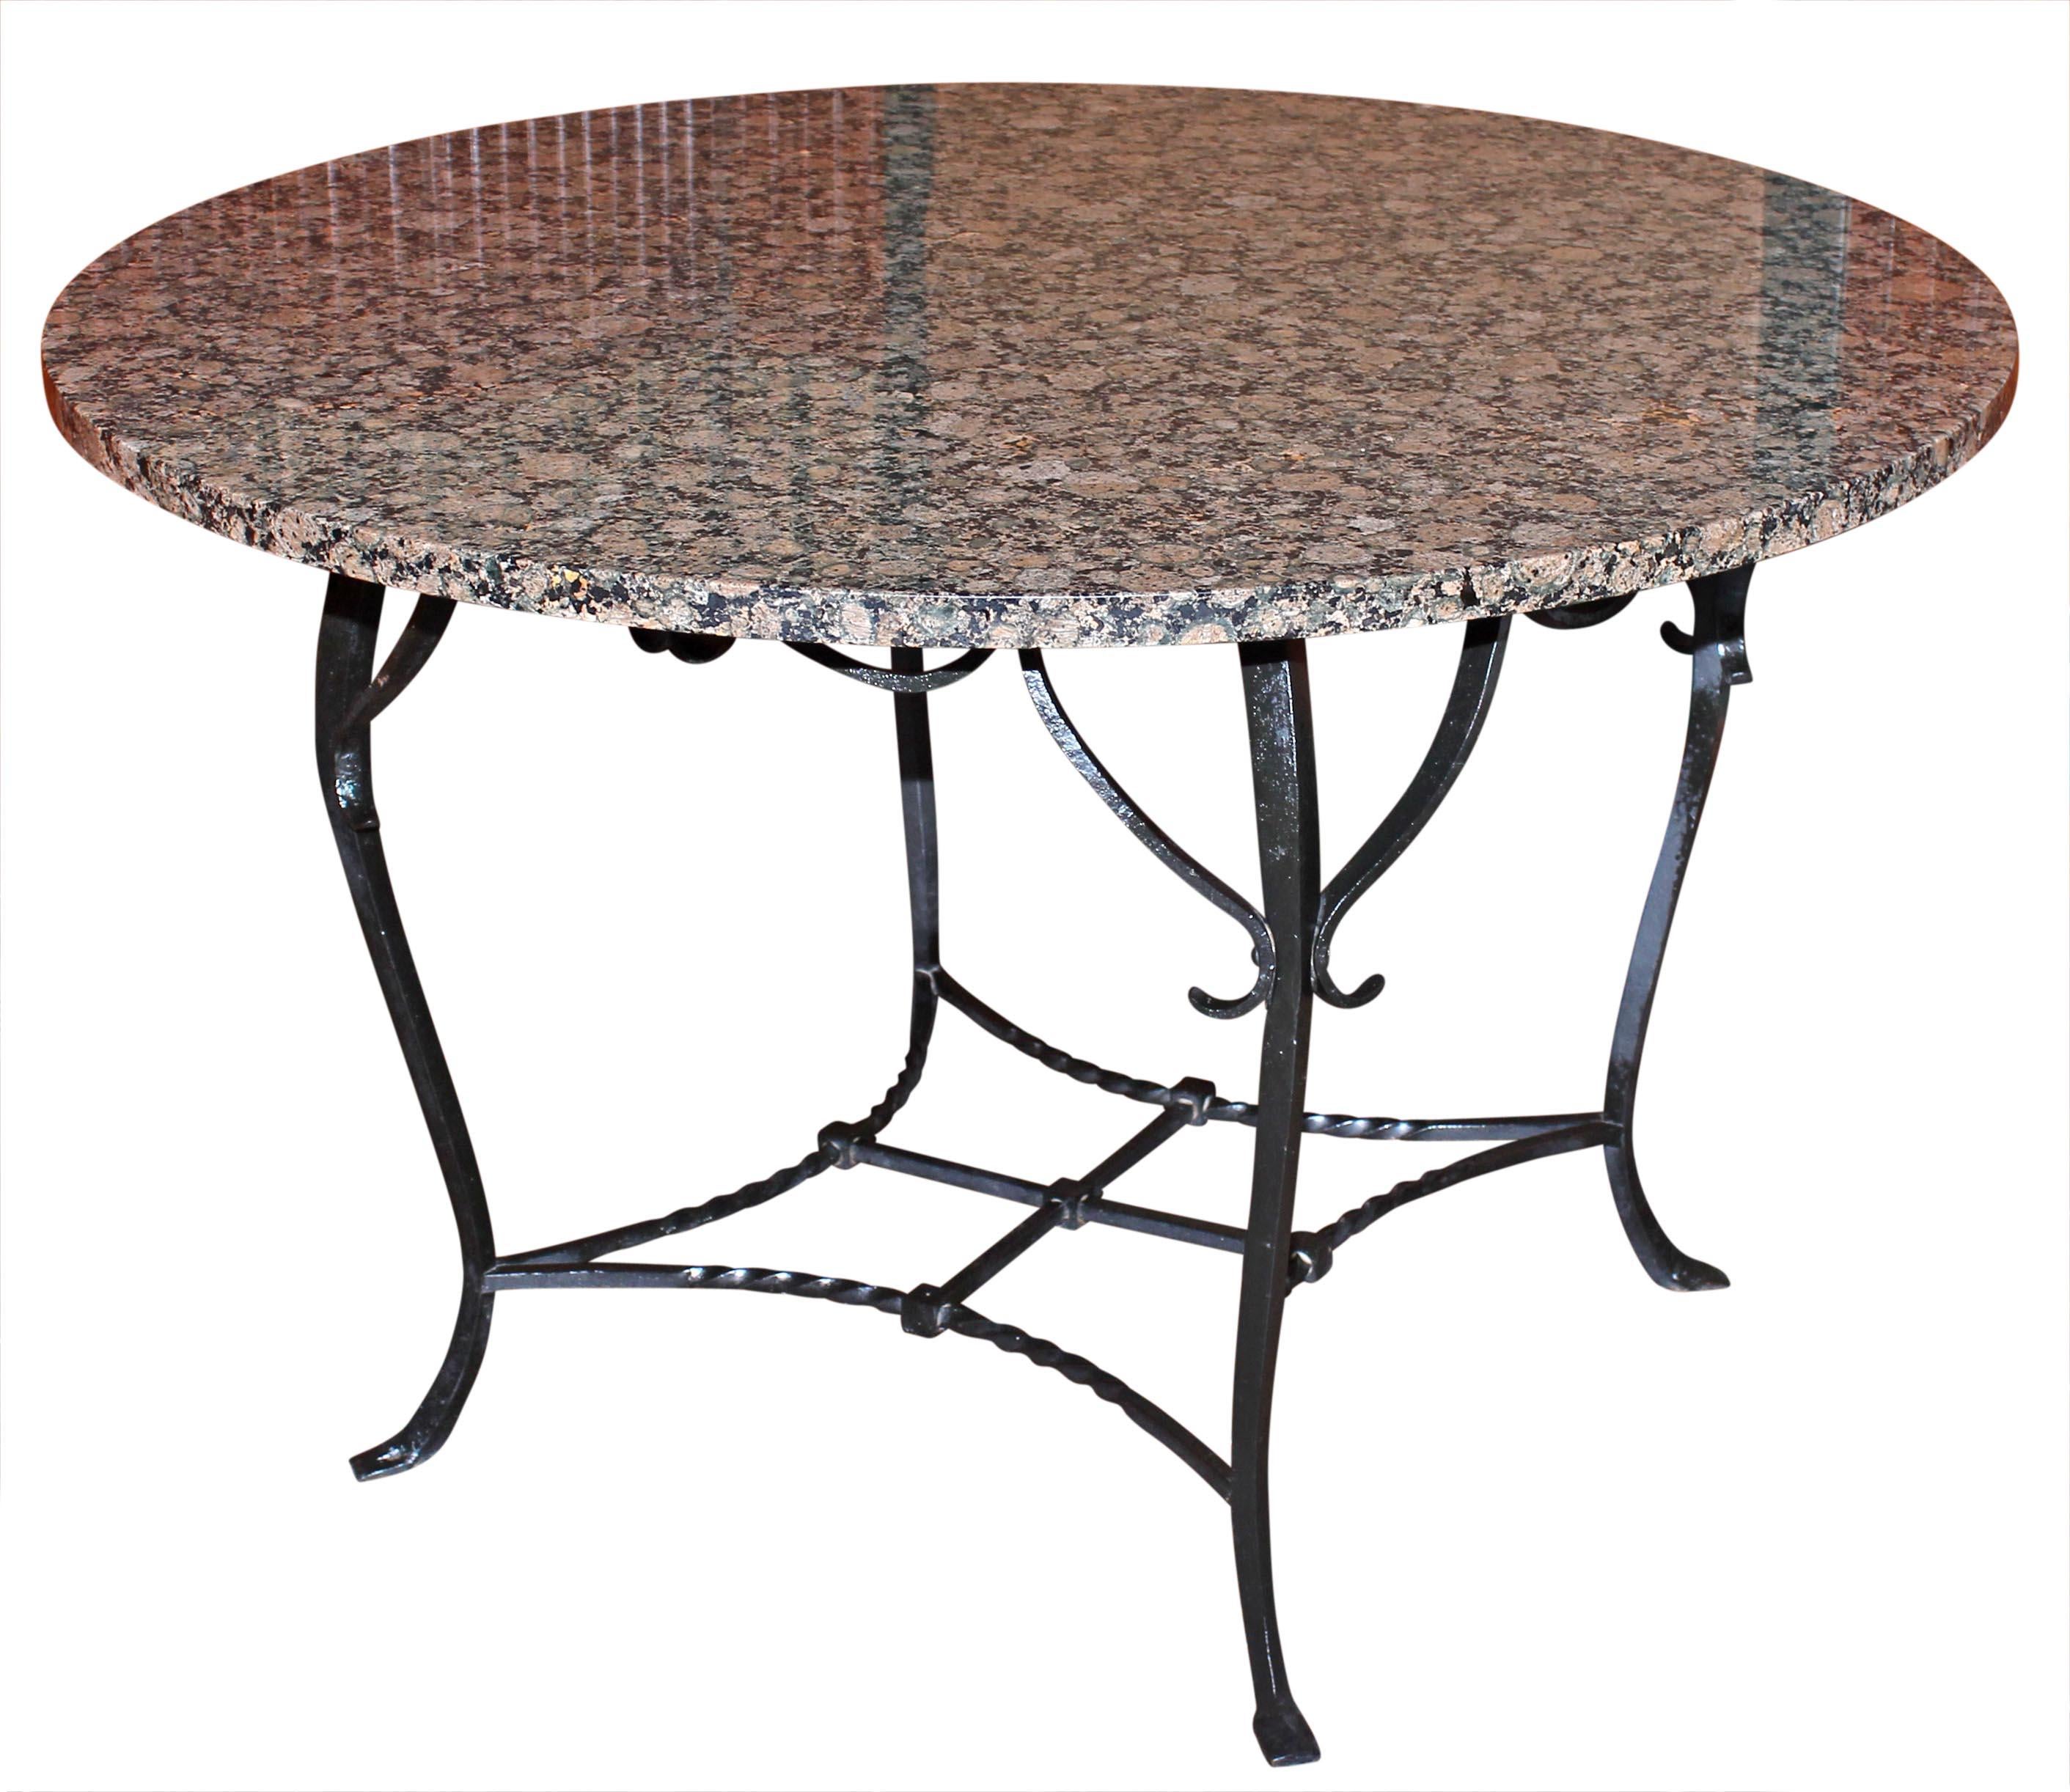 Hand-Crafted Wrought Iron Granite Top Round Kitchen or Dinning Table Handmade, circa 1910 For Sale